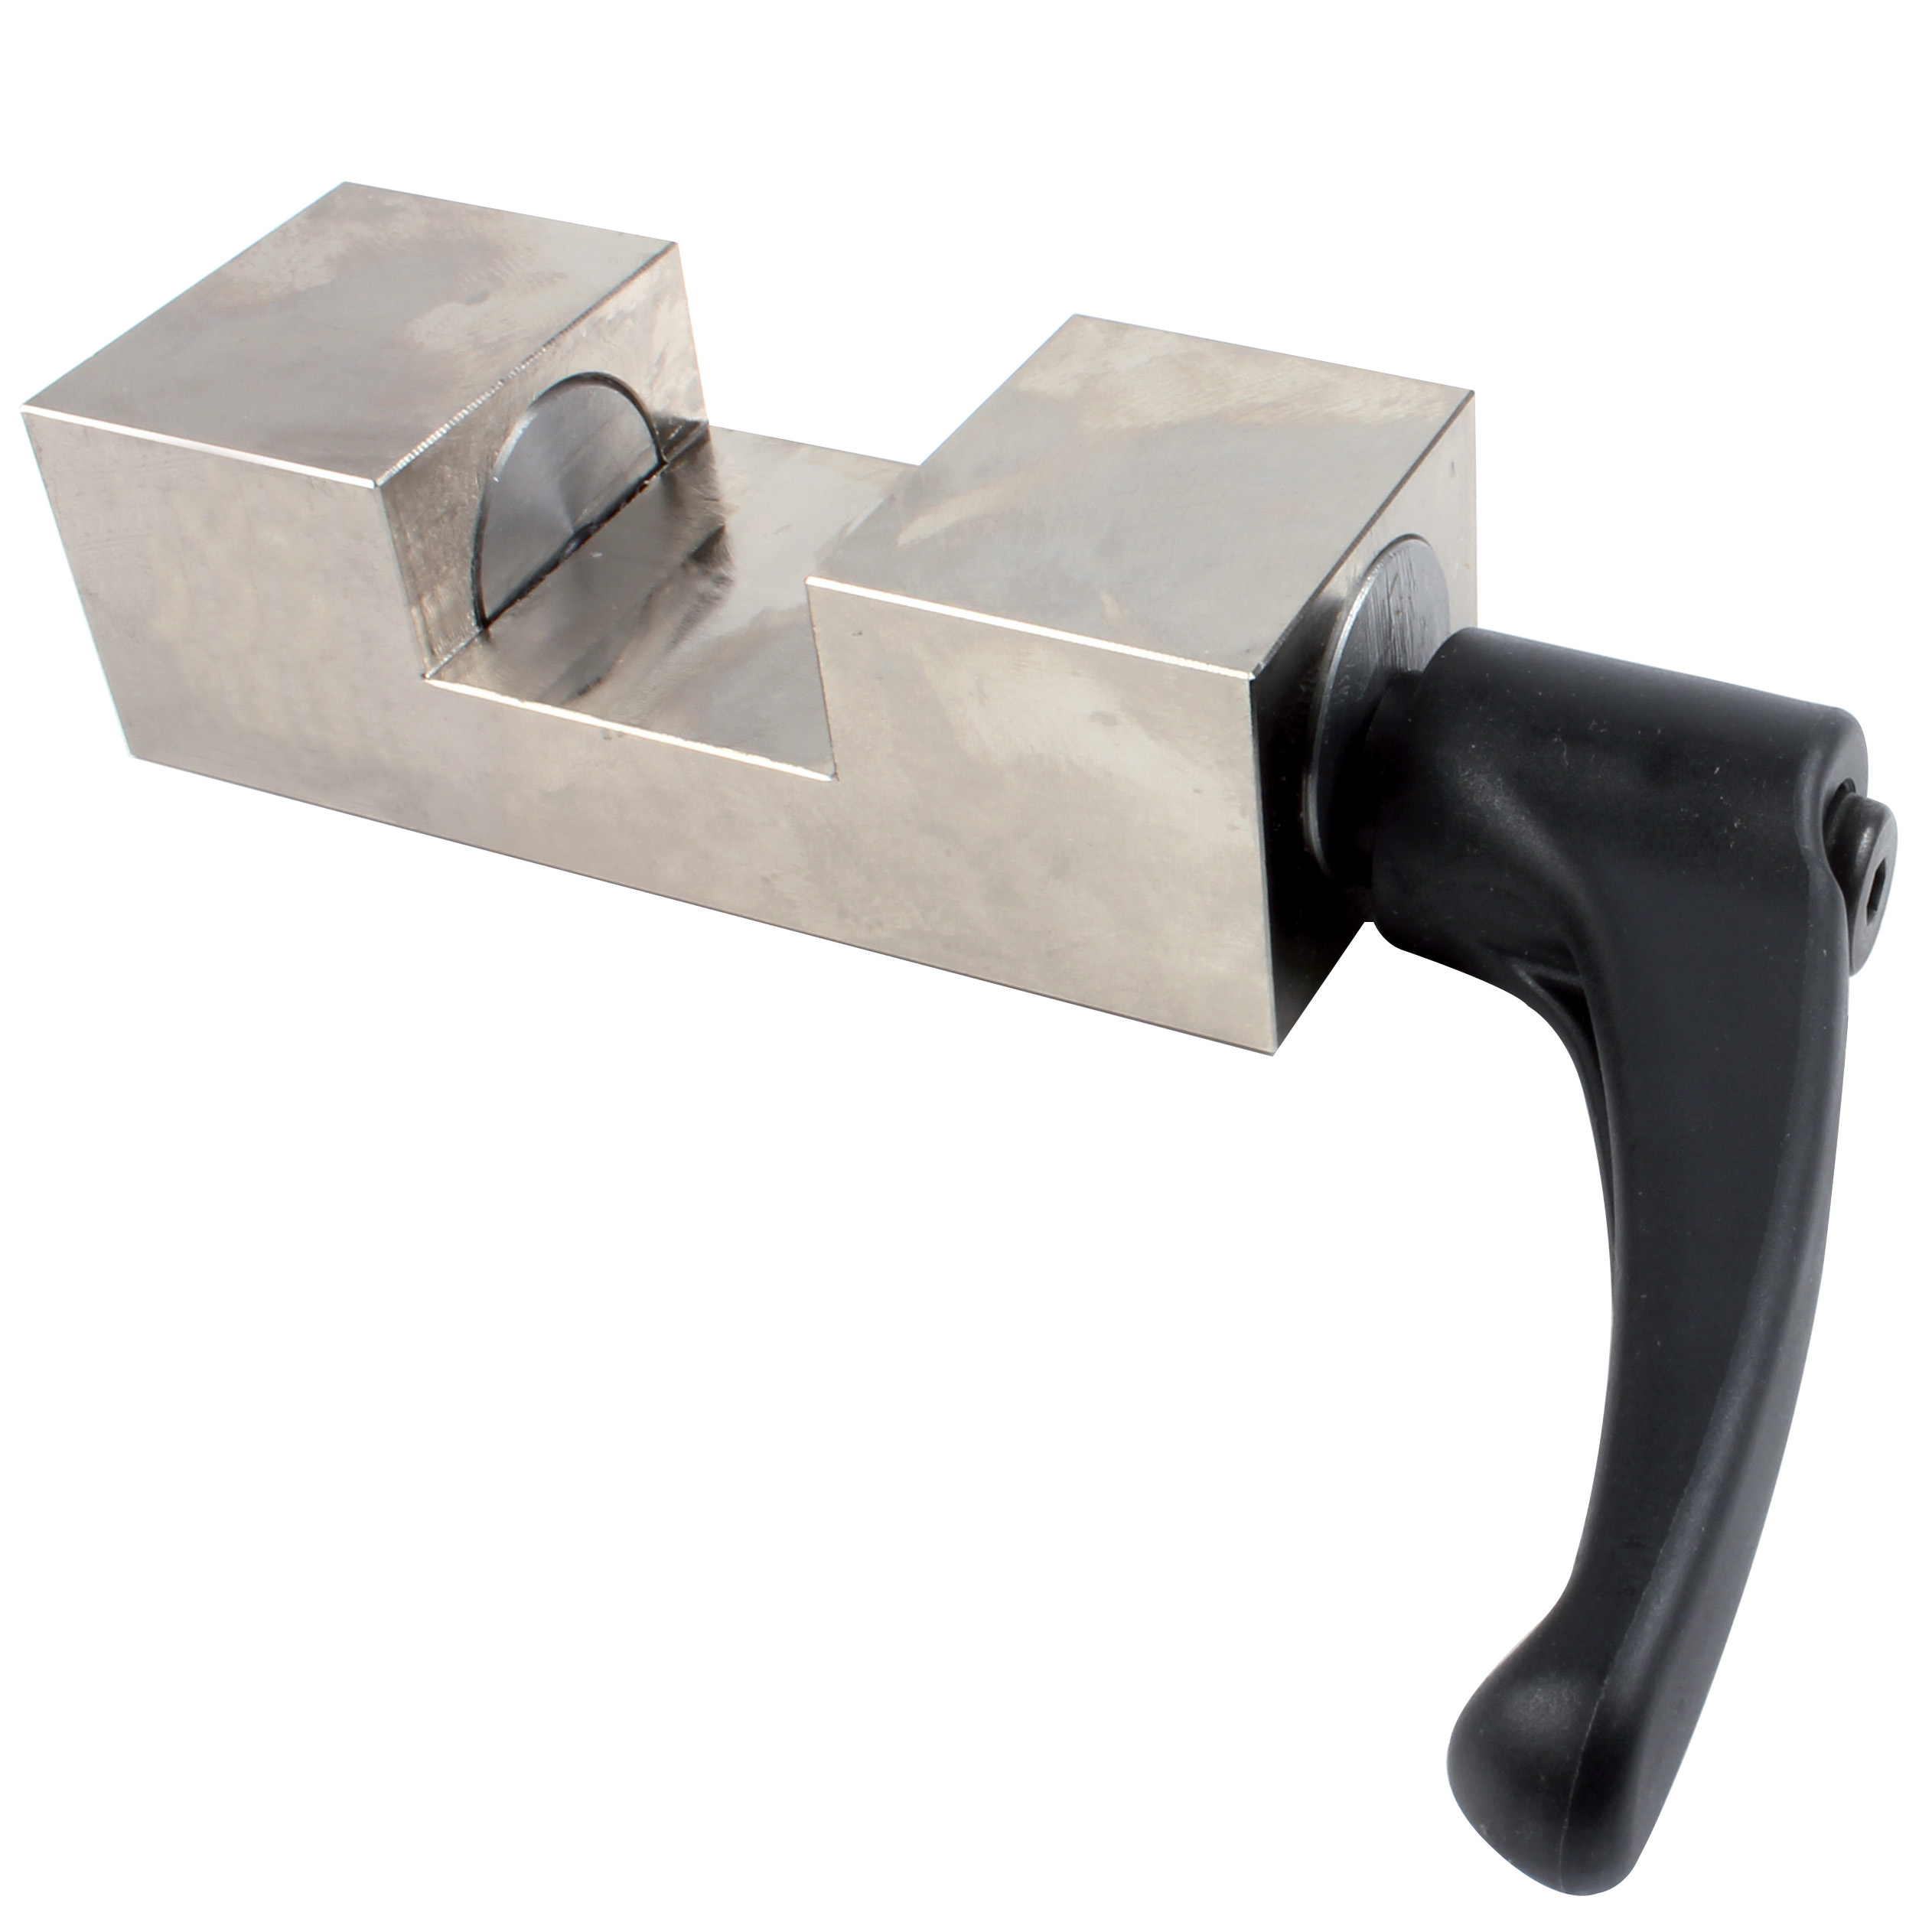 Manual locking clamp - Manual locking clamp LWH - LWH15 to LWH45 rails - 